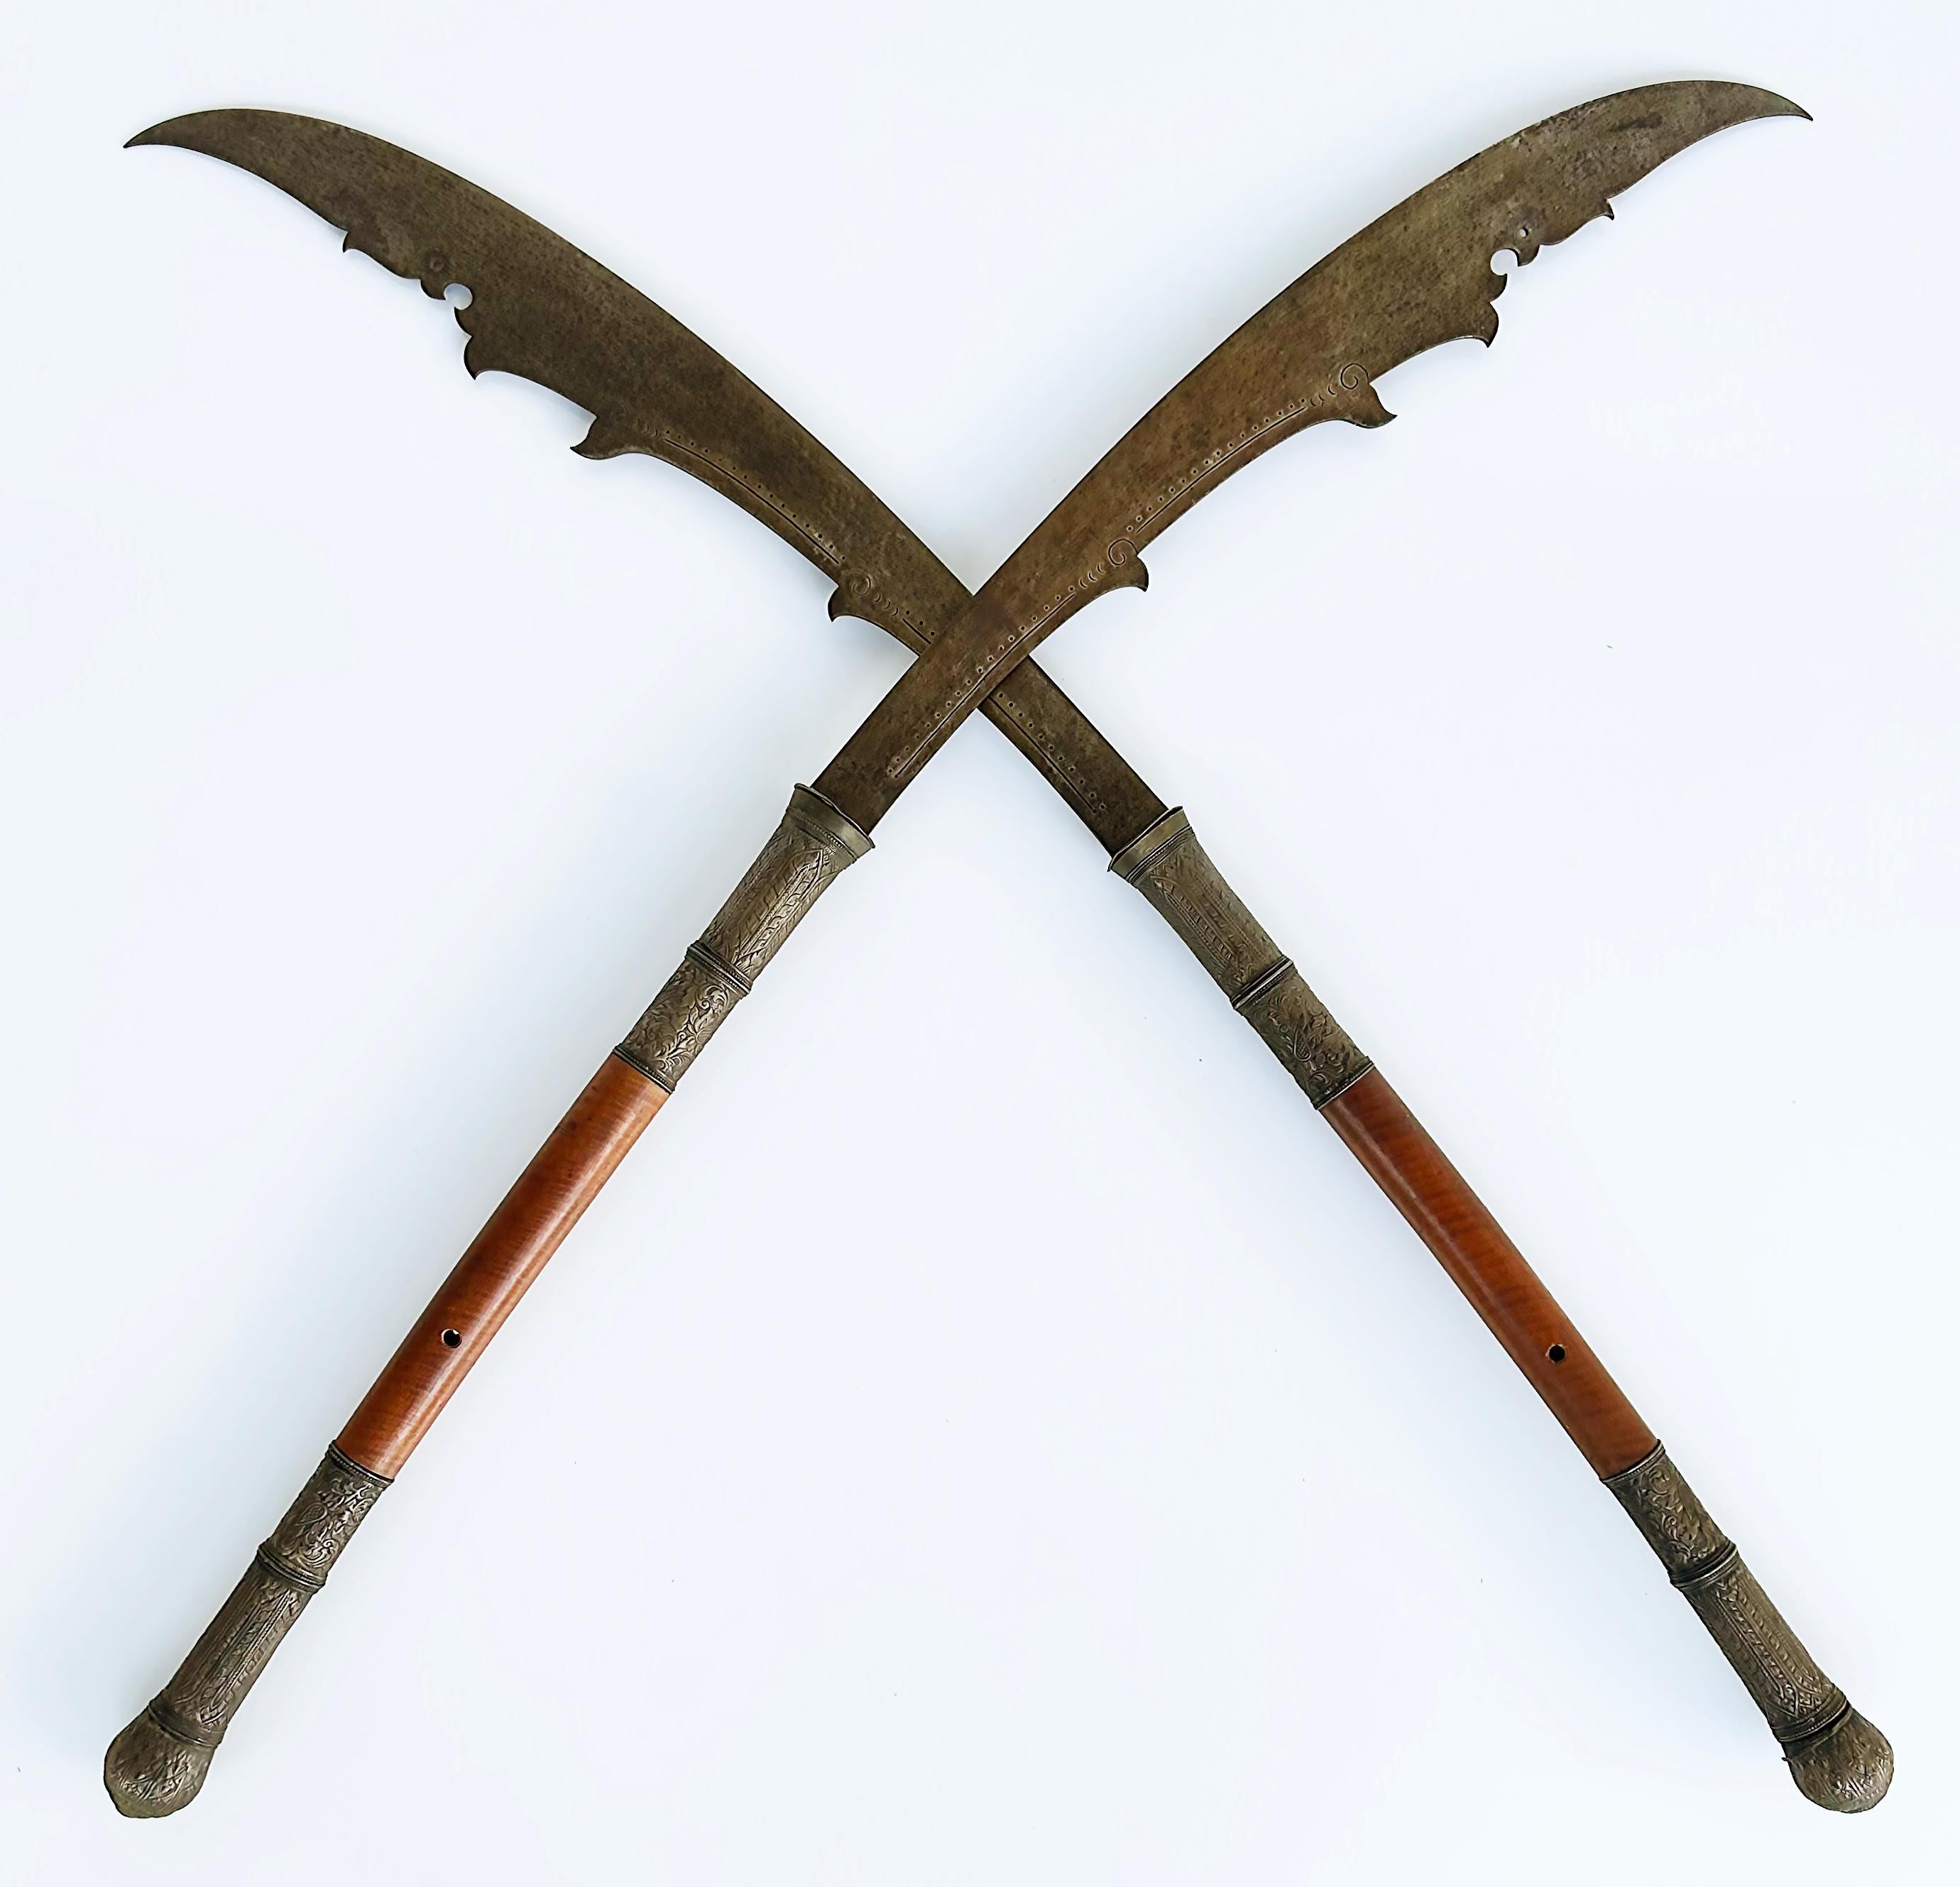 Offered for sale is a pair of 20th-century Lan Na Kingdom Dhaab Ngao Swords from Thailand. They are hand-forged traditional Thai Dhaabs that used ancient techniques that have been passed on for generations. Swords such as these were used while